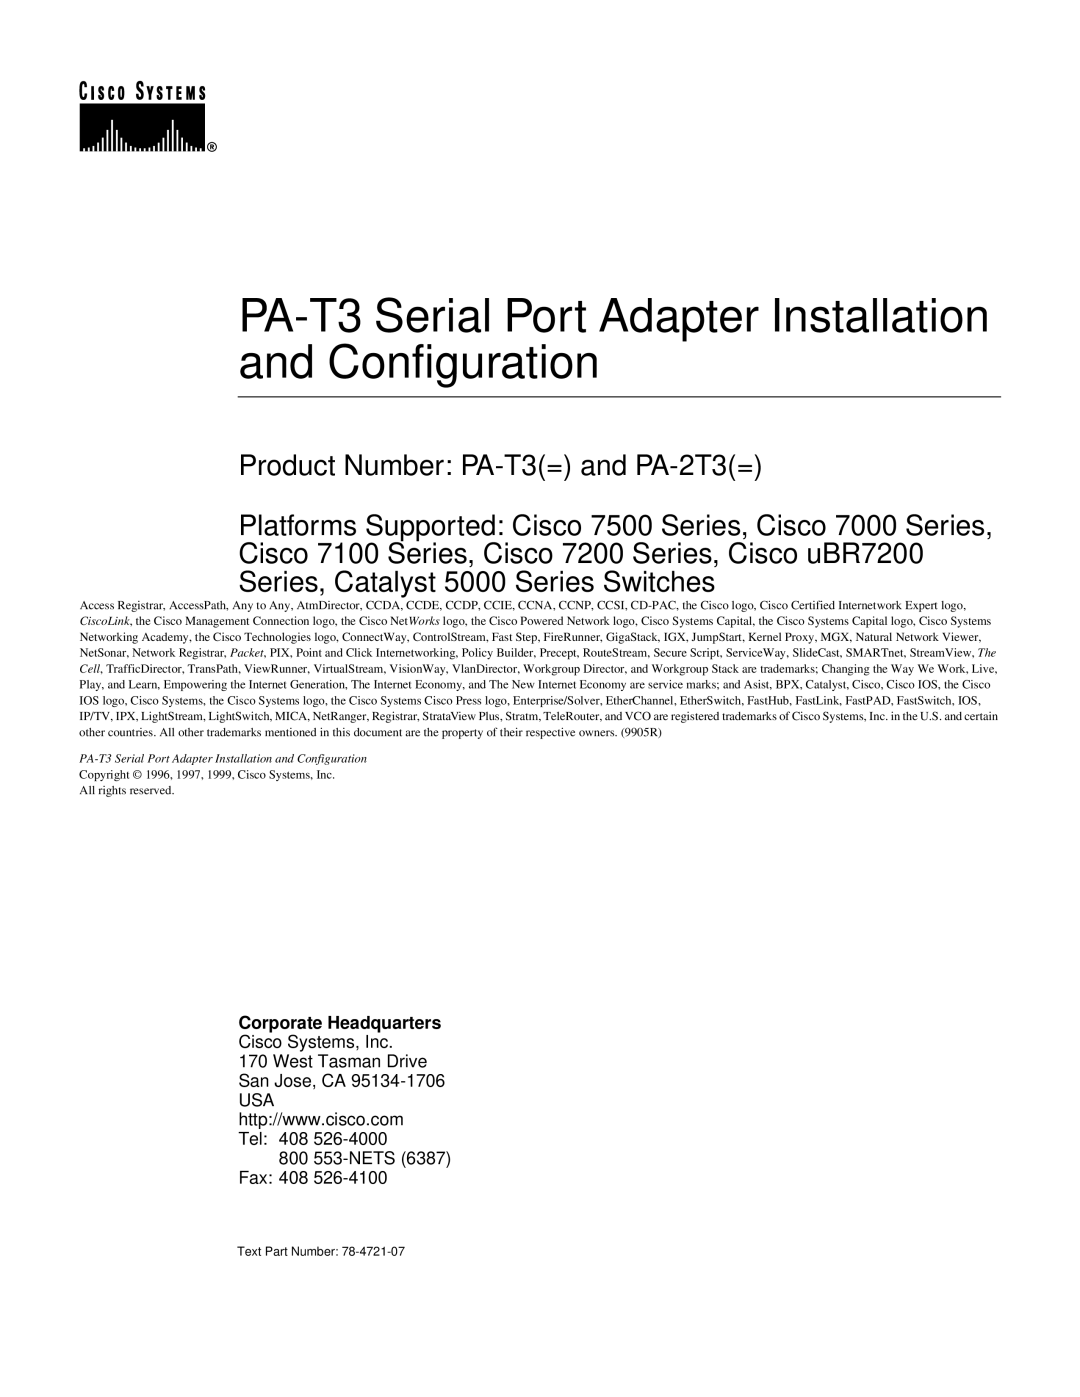 Cisco Systems manual PA-T3 Serial Port Adapter Installation and Configuration, Product Number PA-T3= and PA-2T3= 